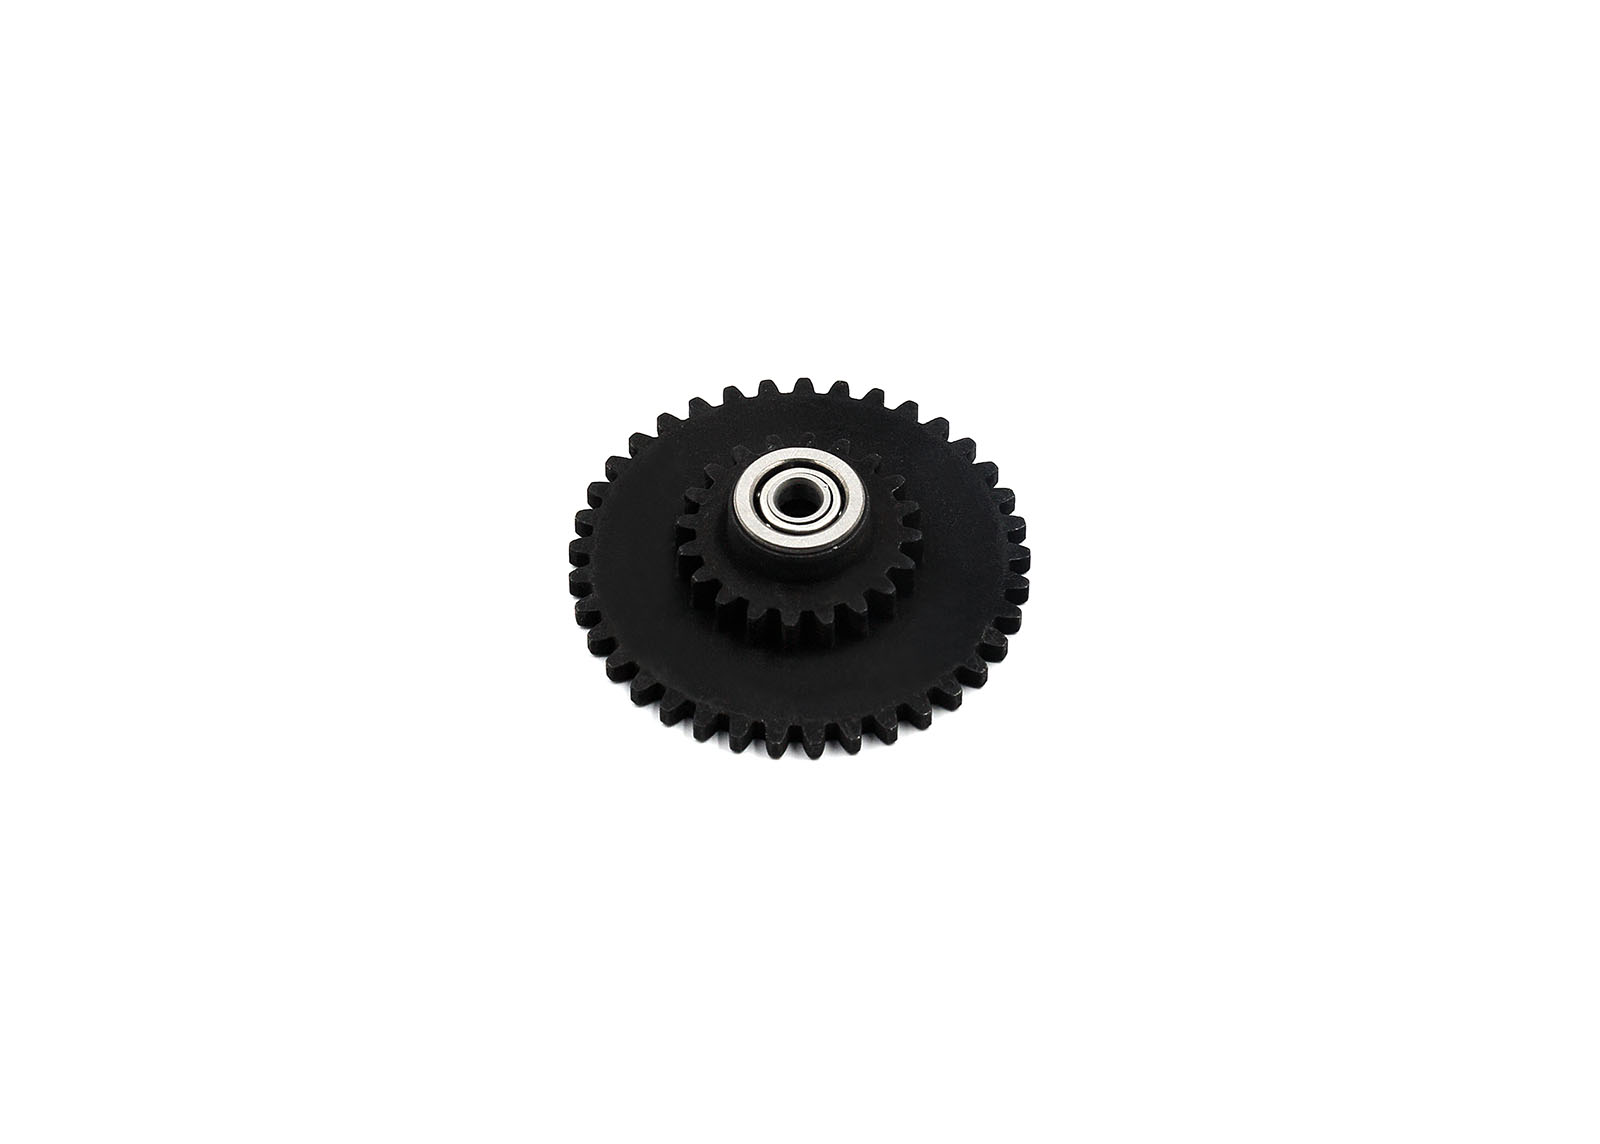 Smooth Spur Gear Ver.2/Ver.3/Ver.6(Torque) with 7mm Ball Bearing - Modify Airsoft parts